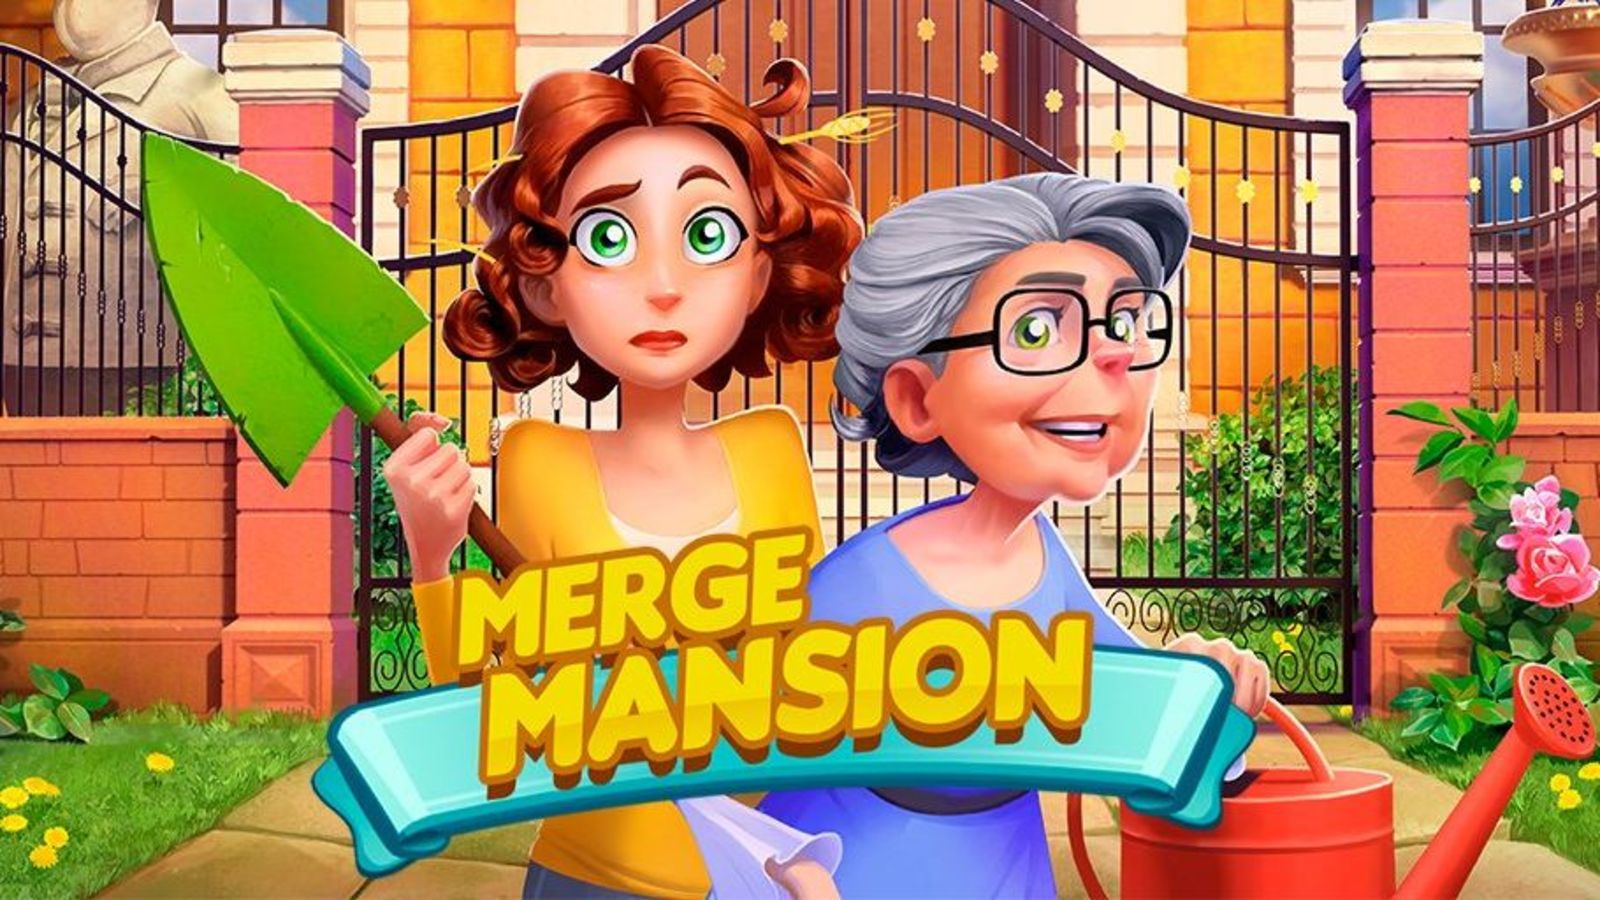 What is Merge Mansion really, the mobile game with those dramatic ads